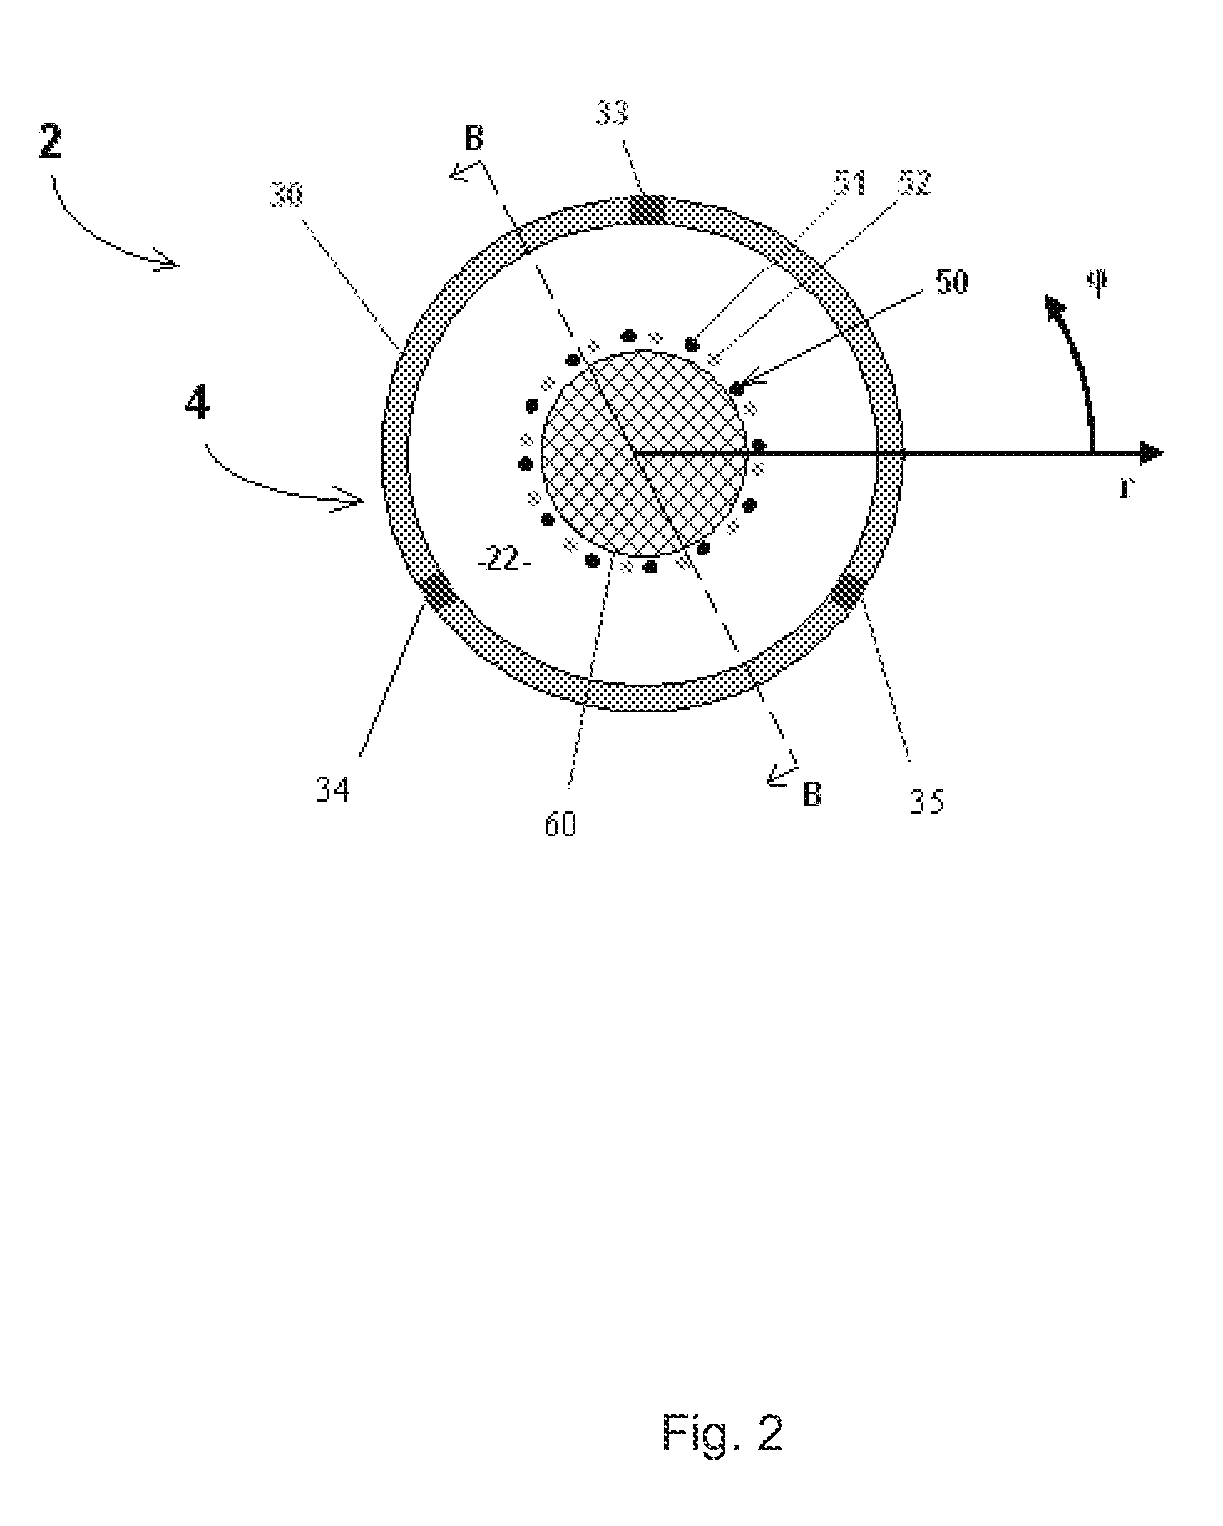 Apparatus and methods for ion mobility spectrometry